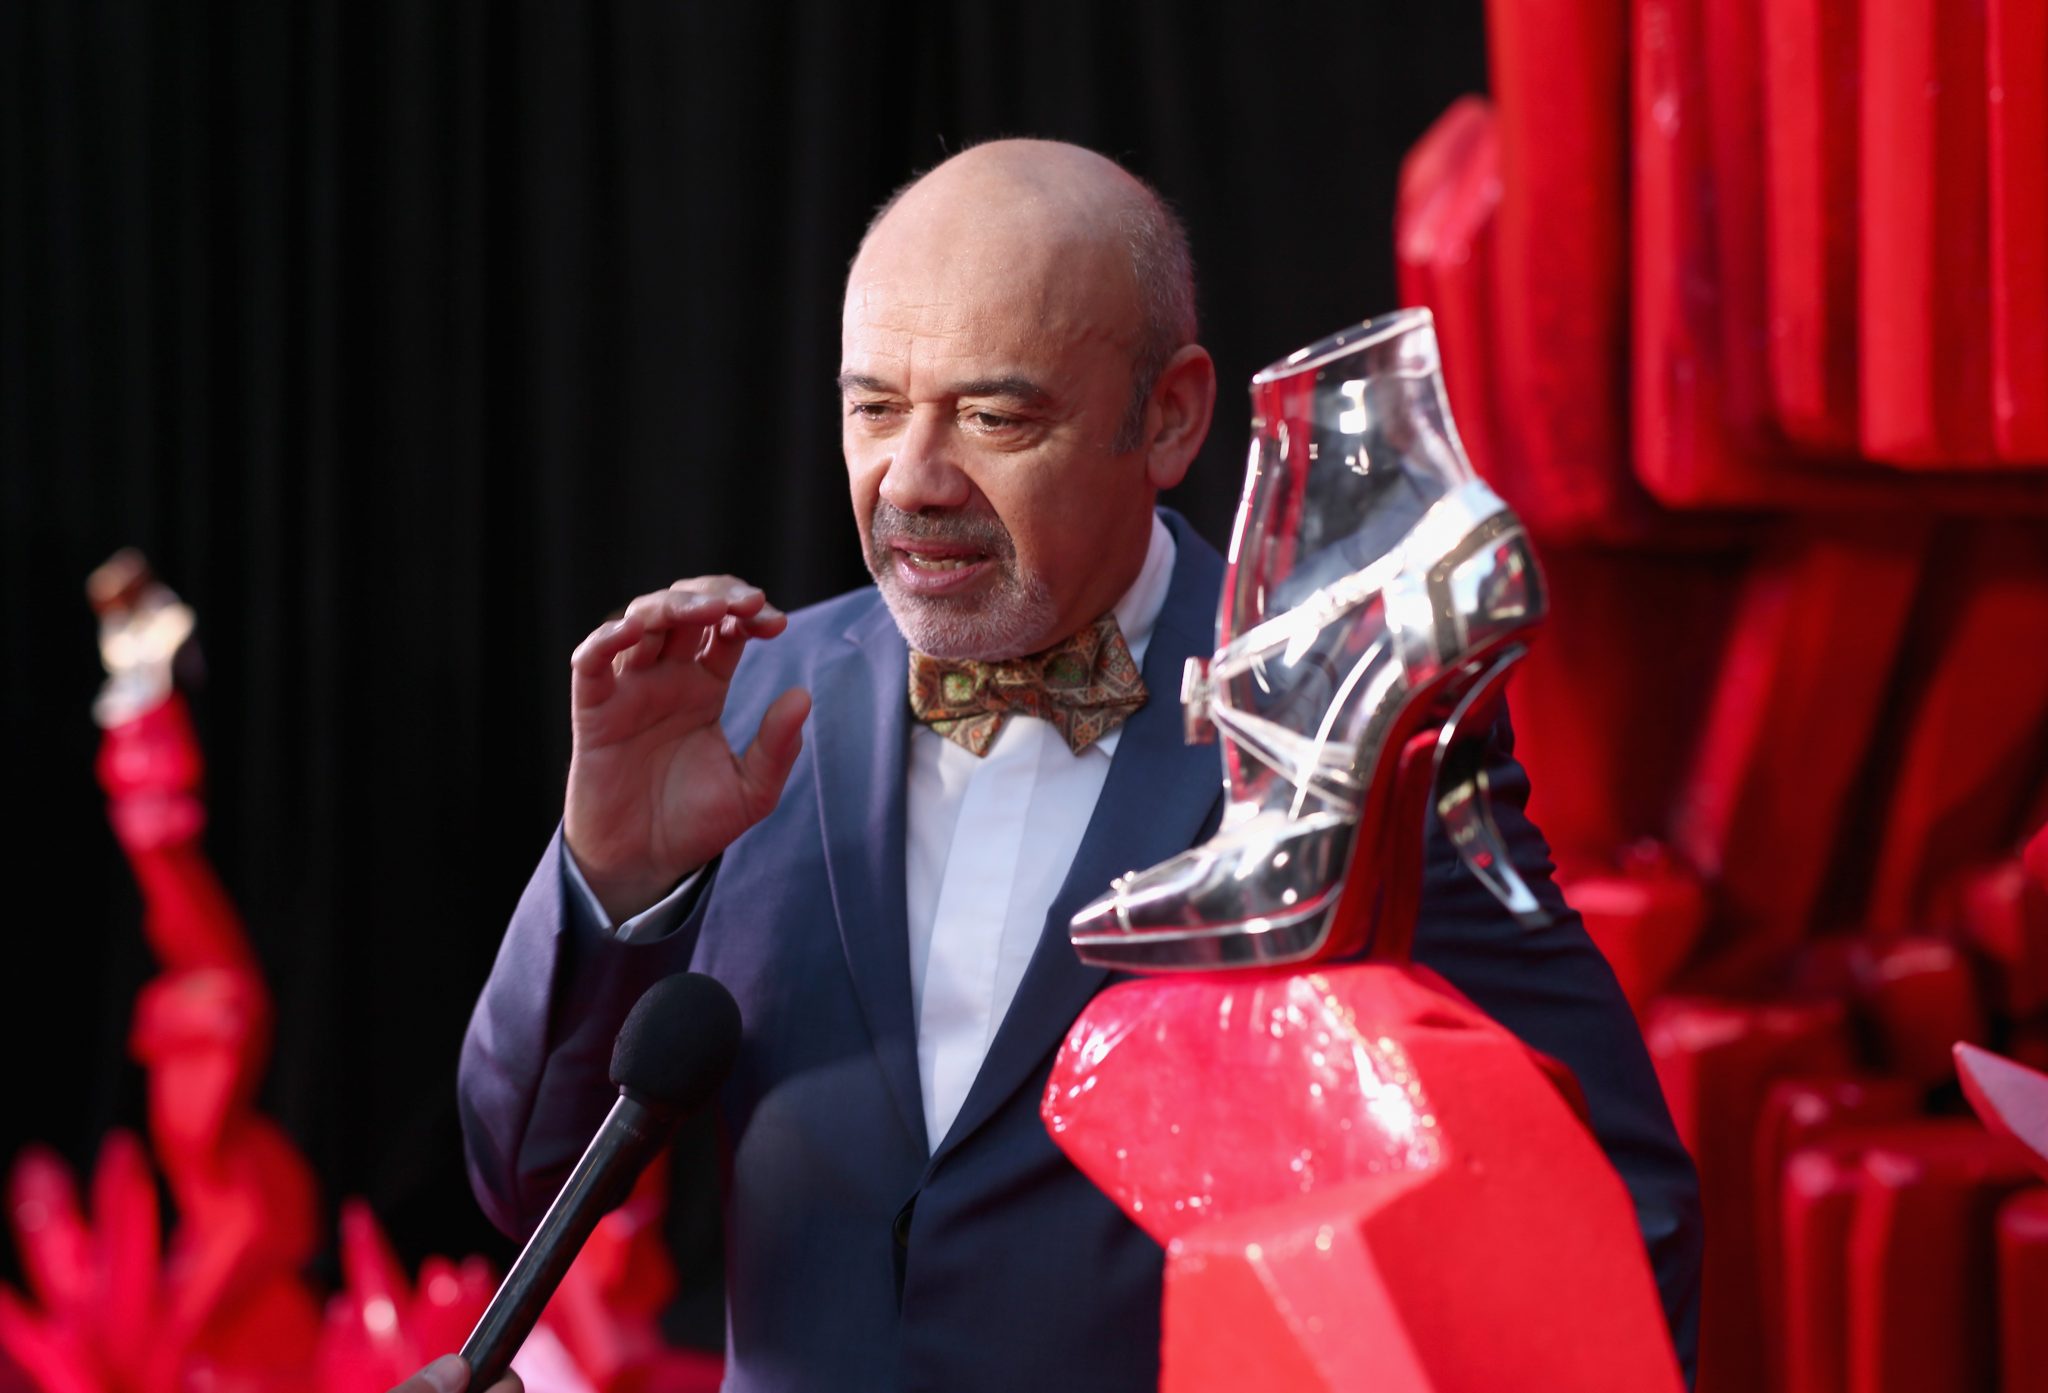 Christian Louboutin Collaborates With Disney on 'Star Wars' Shoes